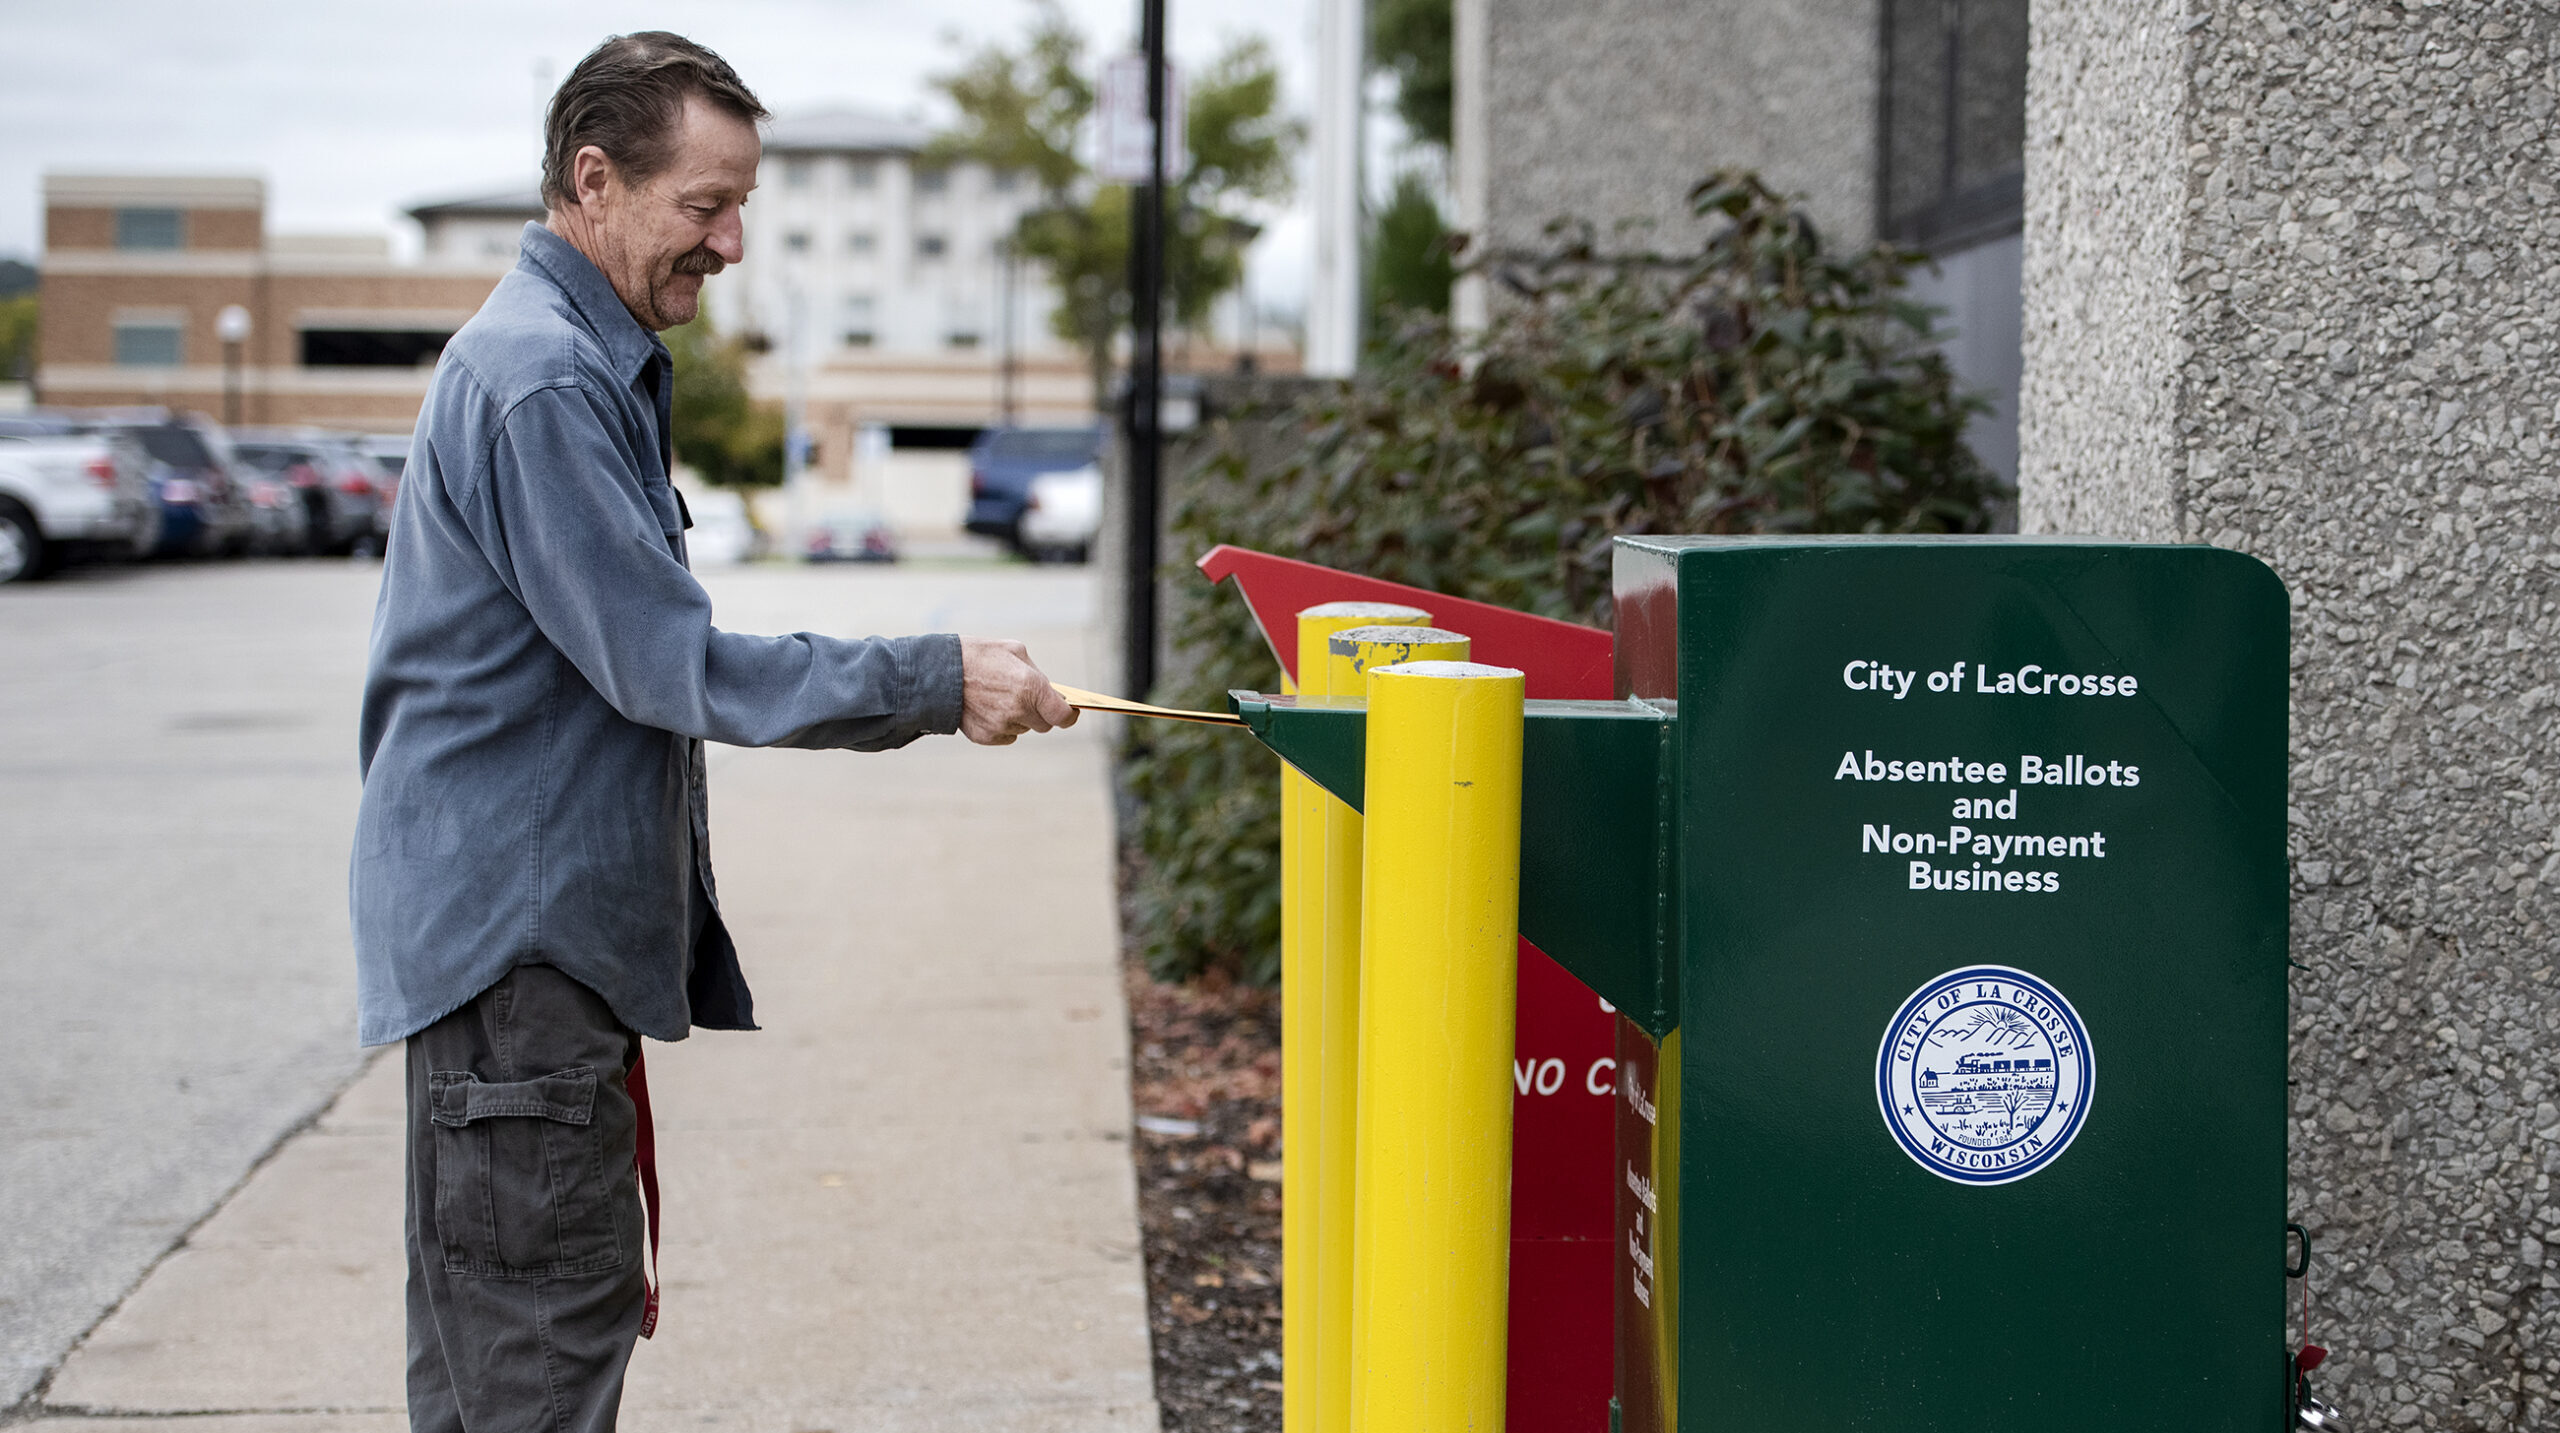 A man places a ballot in a yellow envelope into a green drop off box that resembles a public mail box.